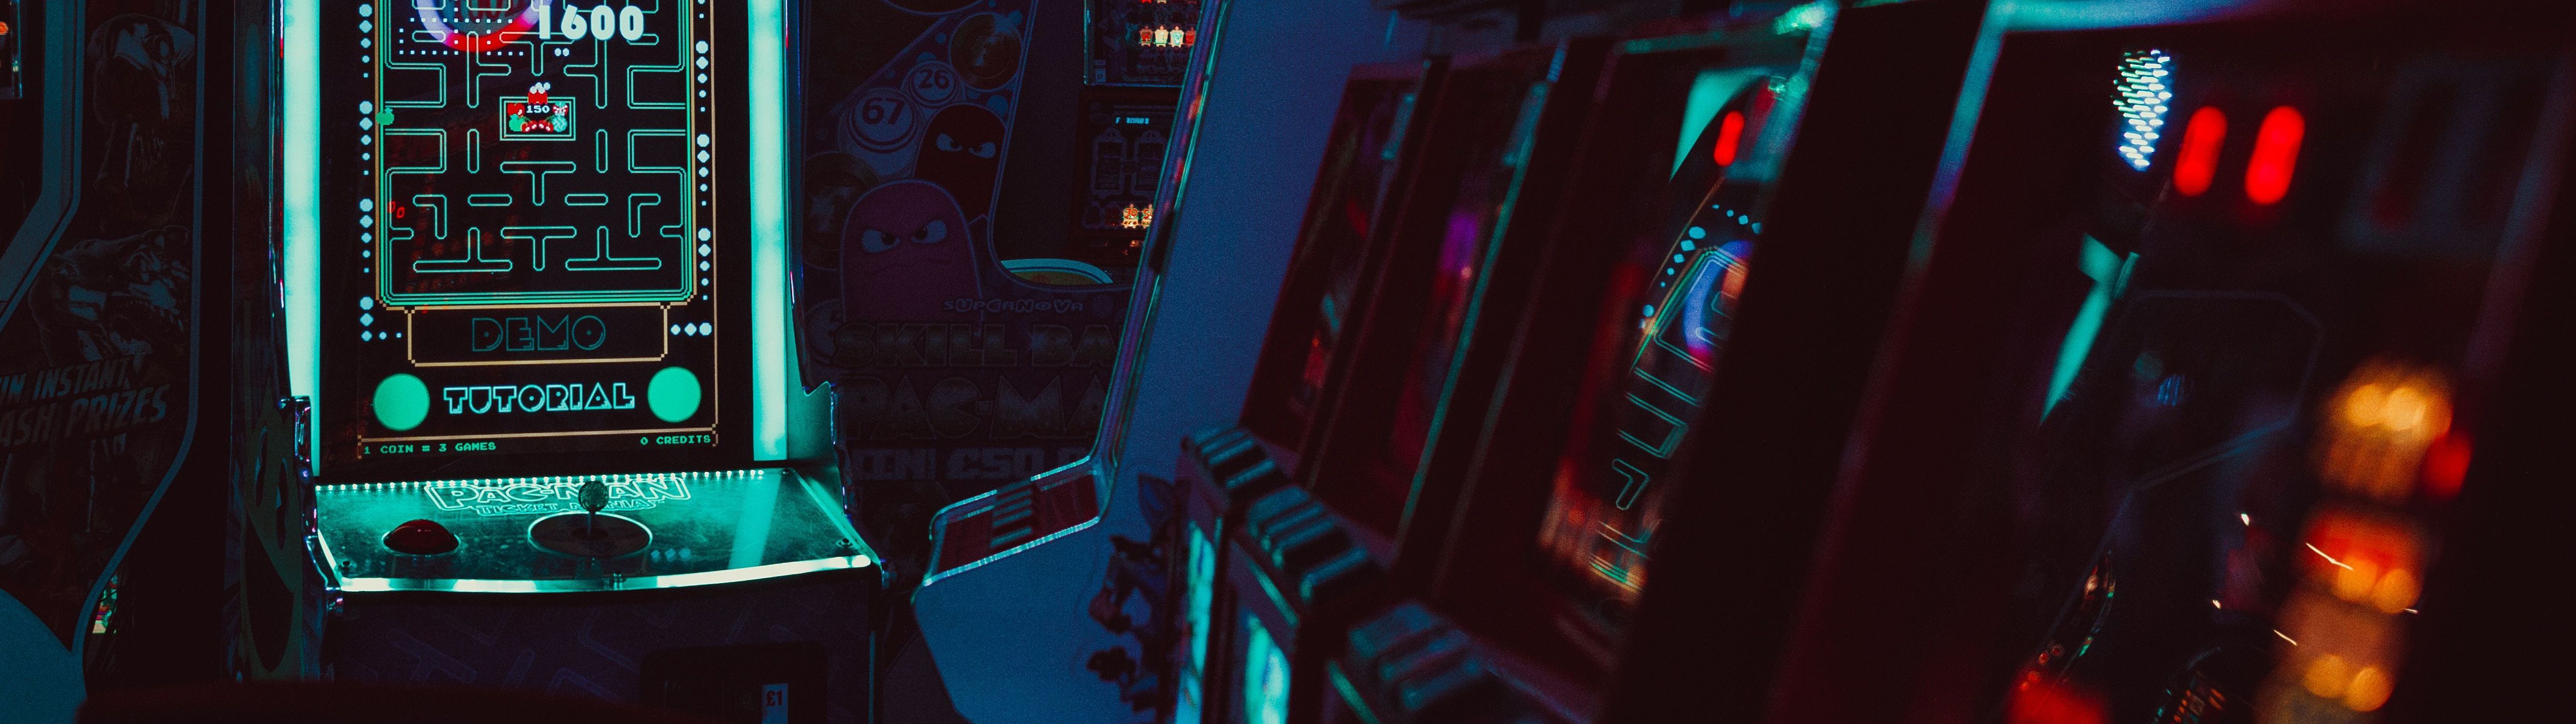 A machine that is playing some sort of game - 5120x1440